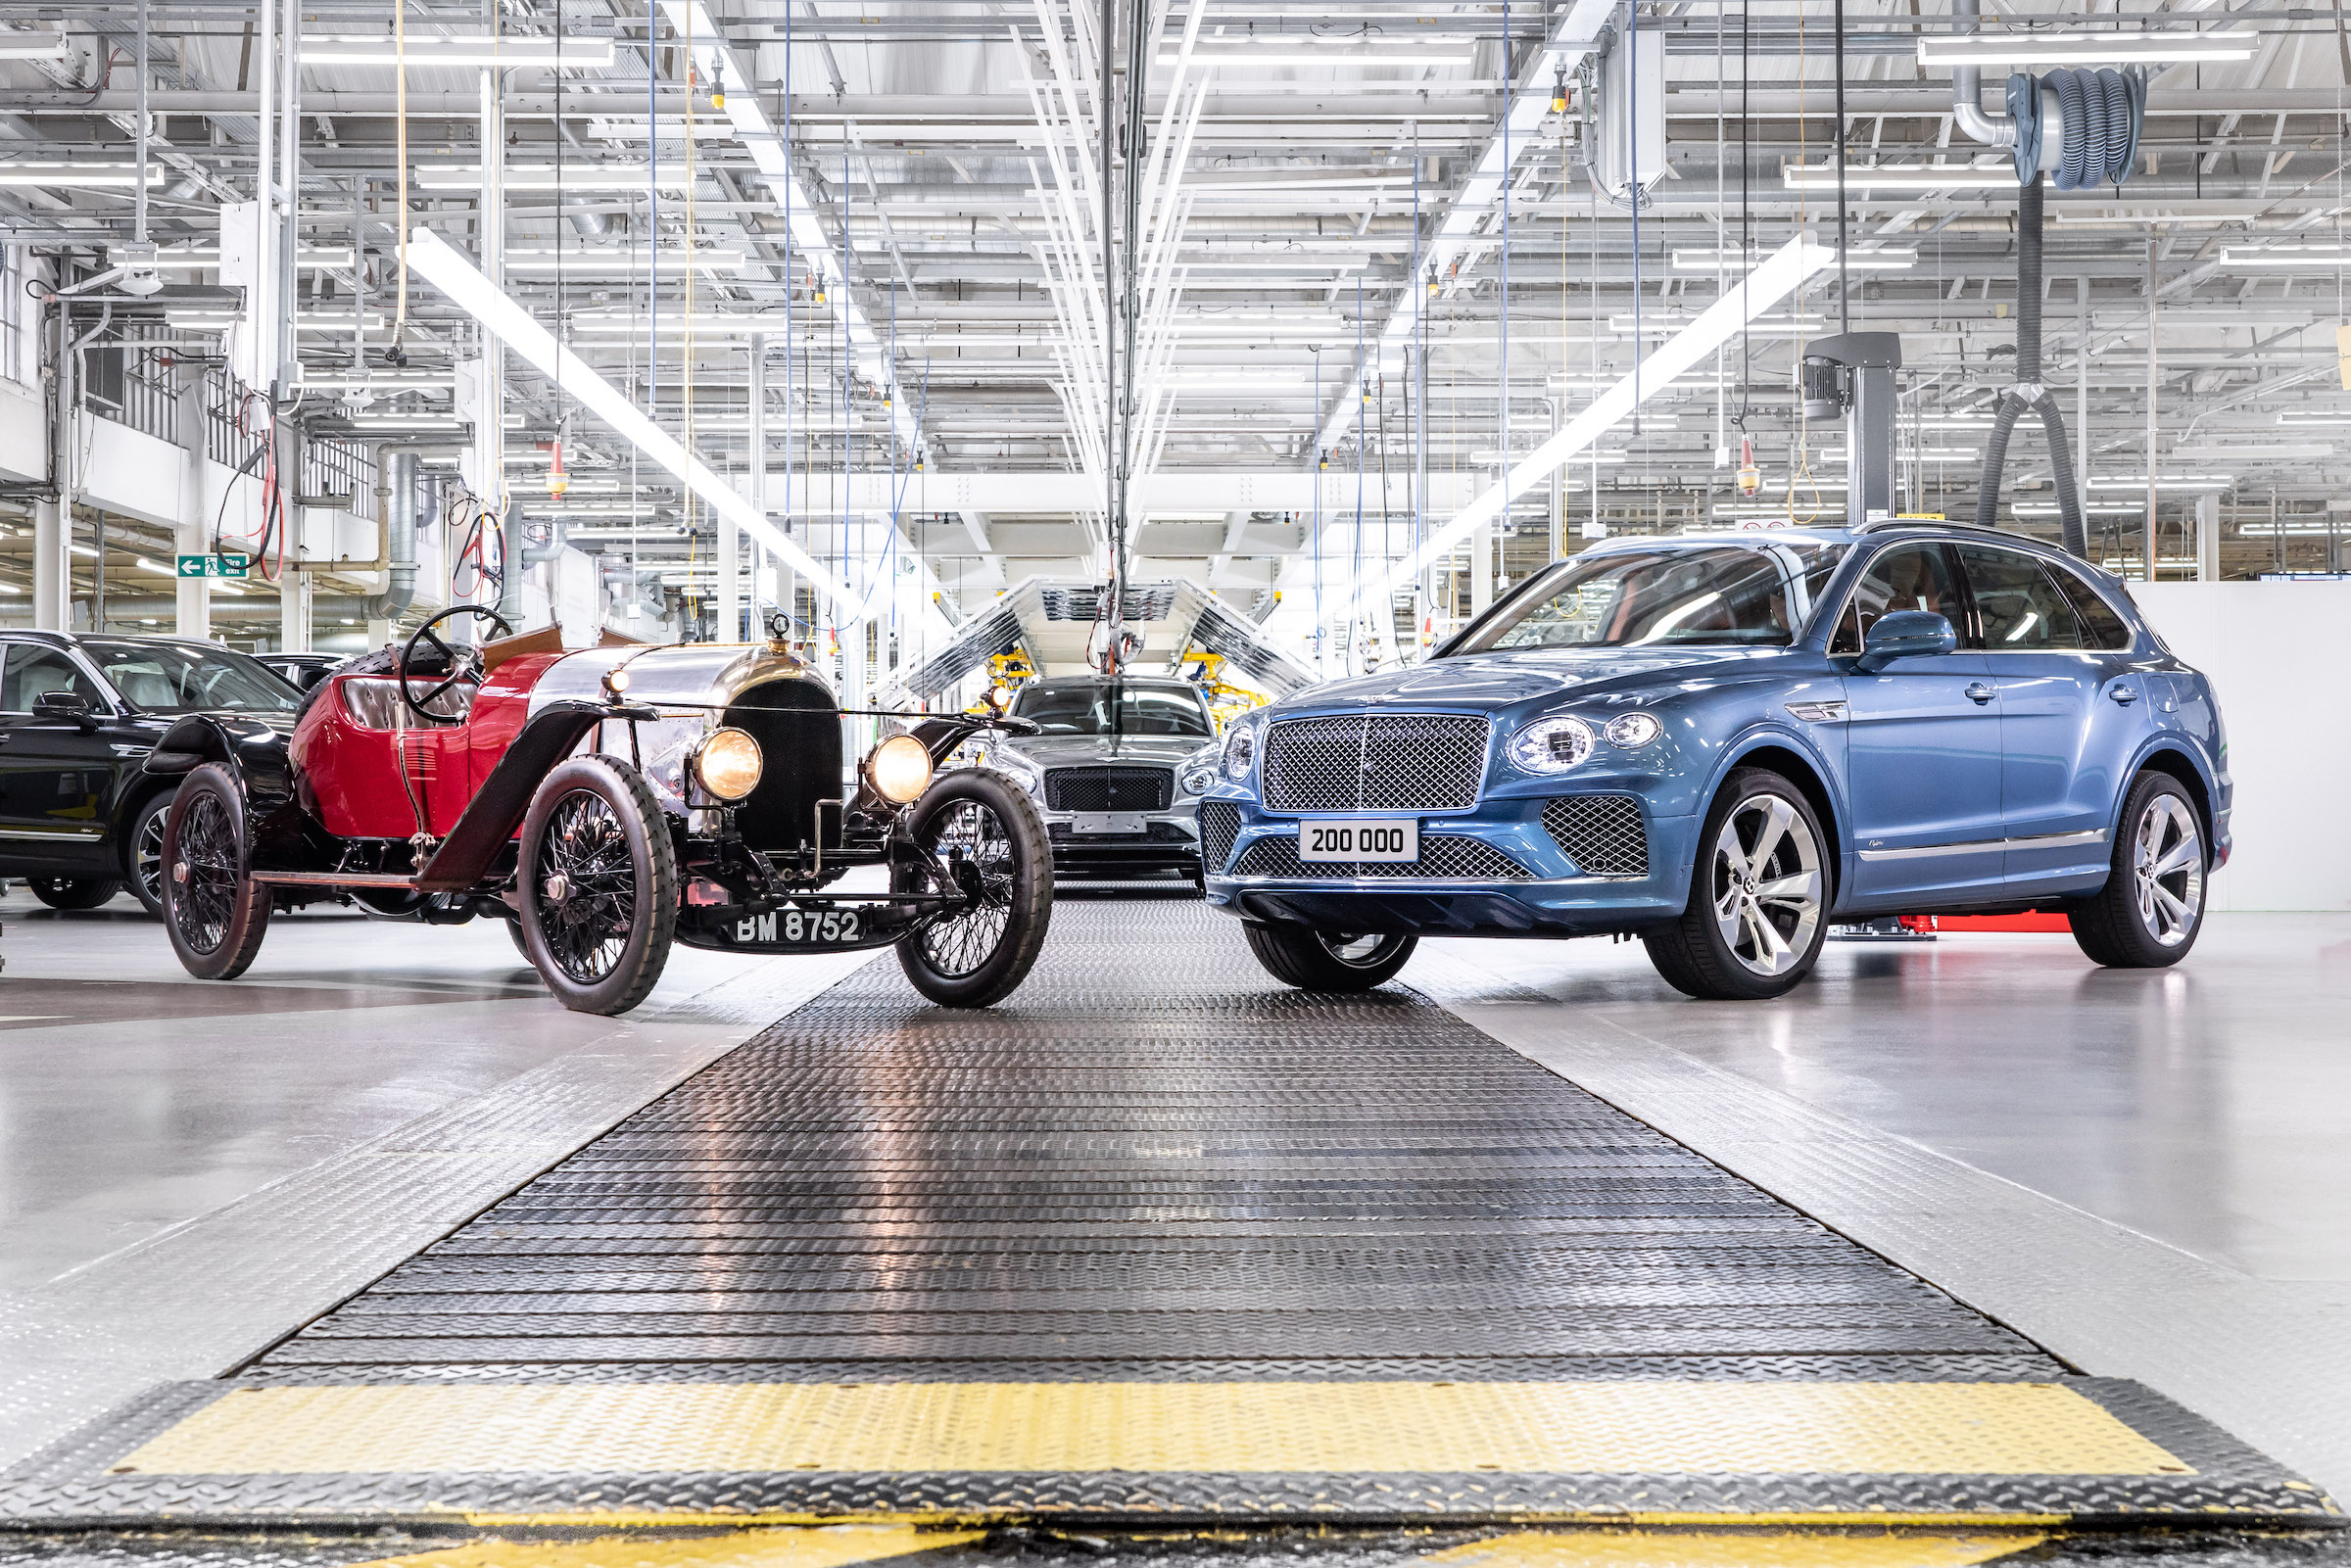 It took Bentley over 100 years to build as many cars as Toyota does in a week